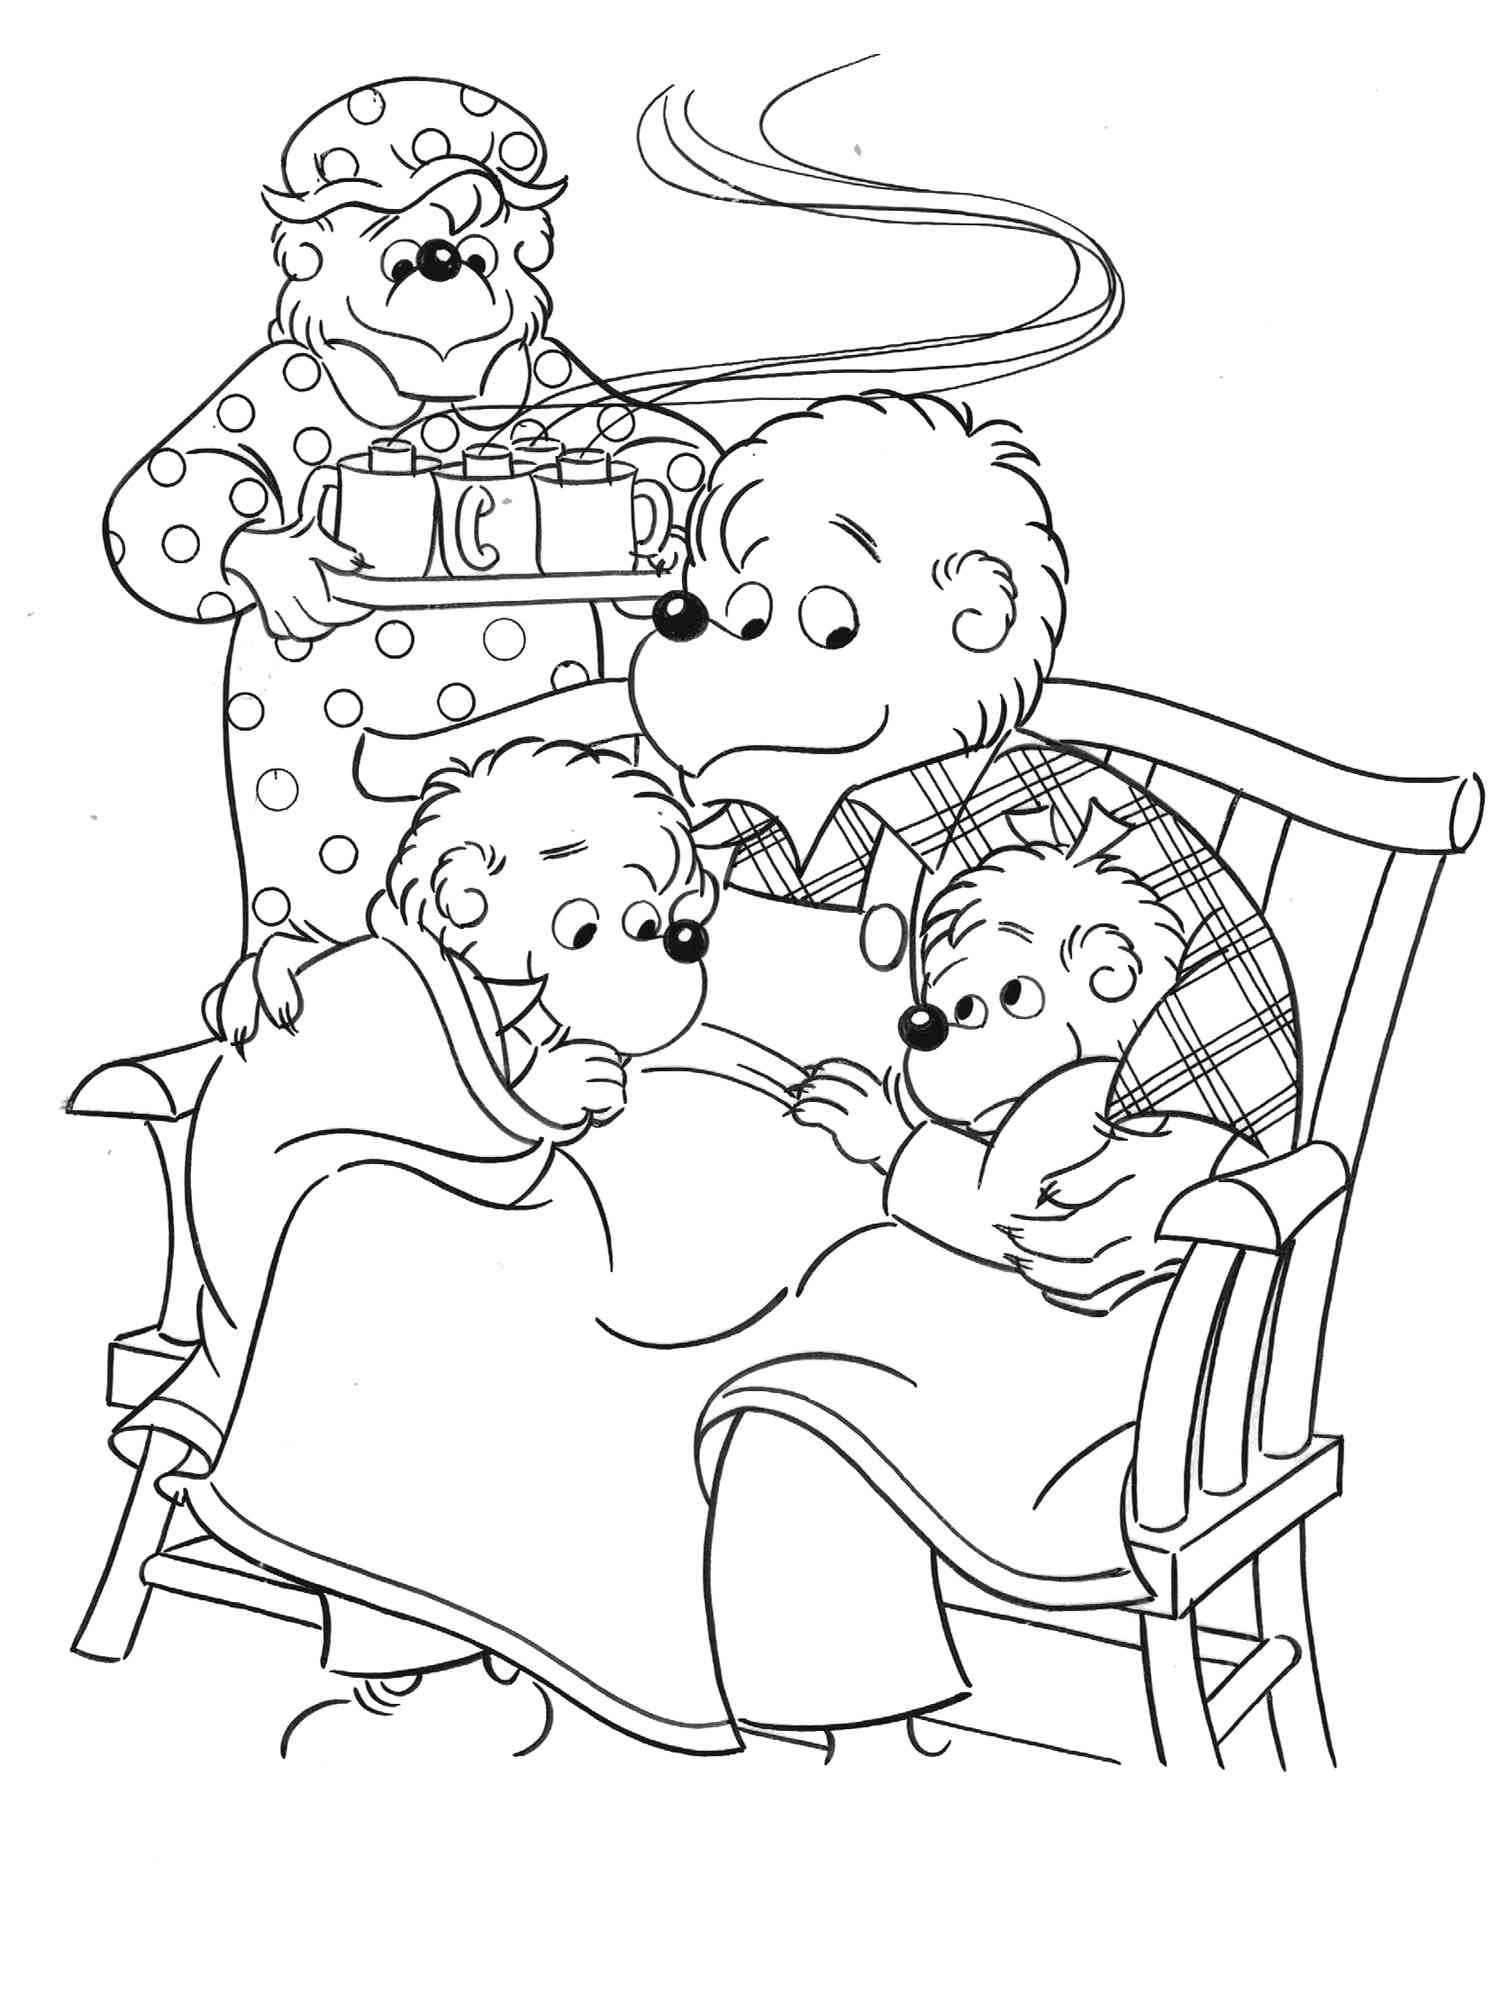 Berenstain bears coloring pages free